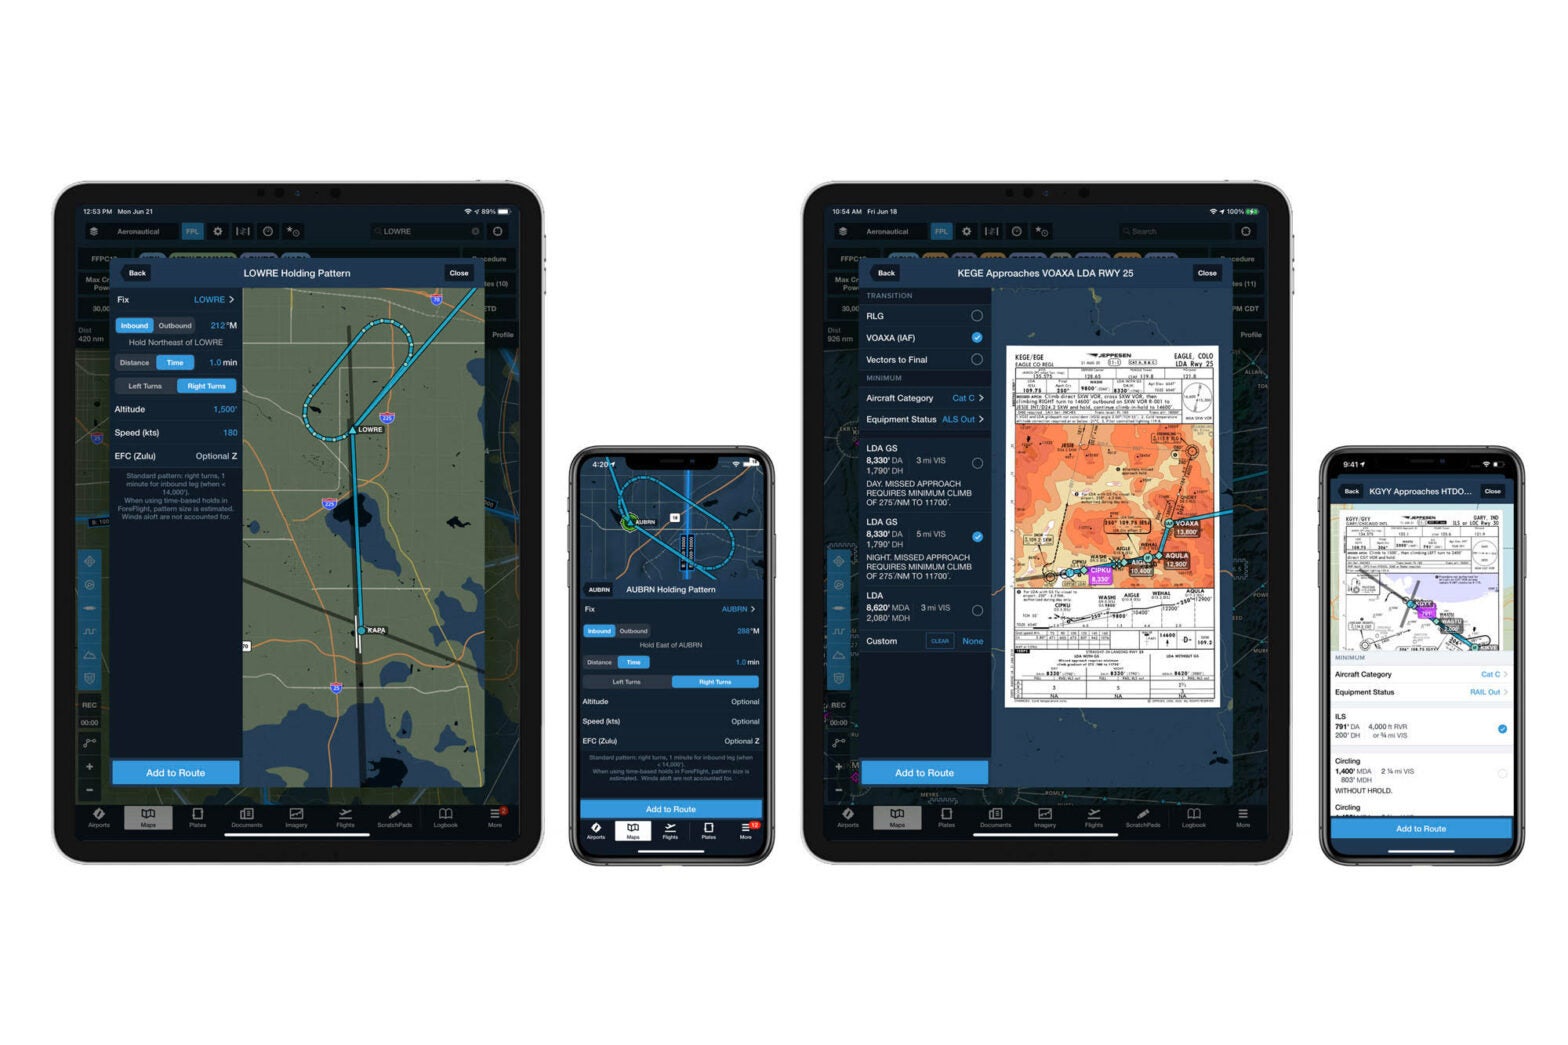 ForeFlight’s Latest Update Includes New Hold Advisor Feature